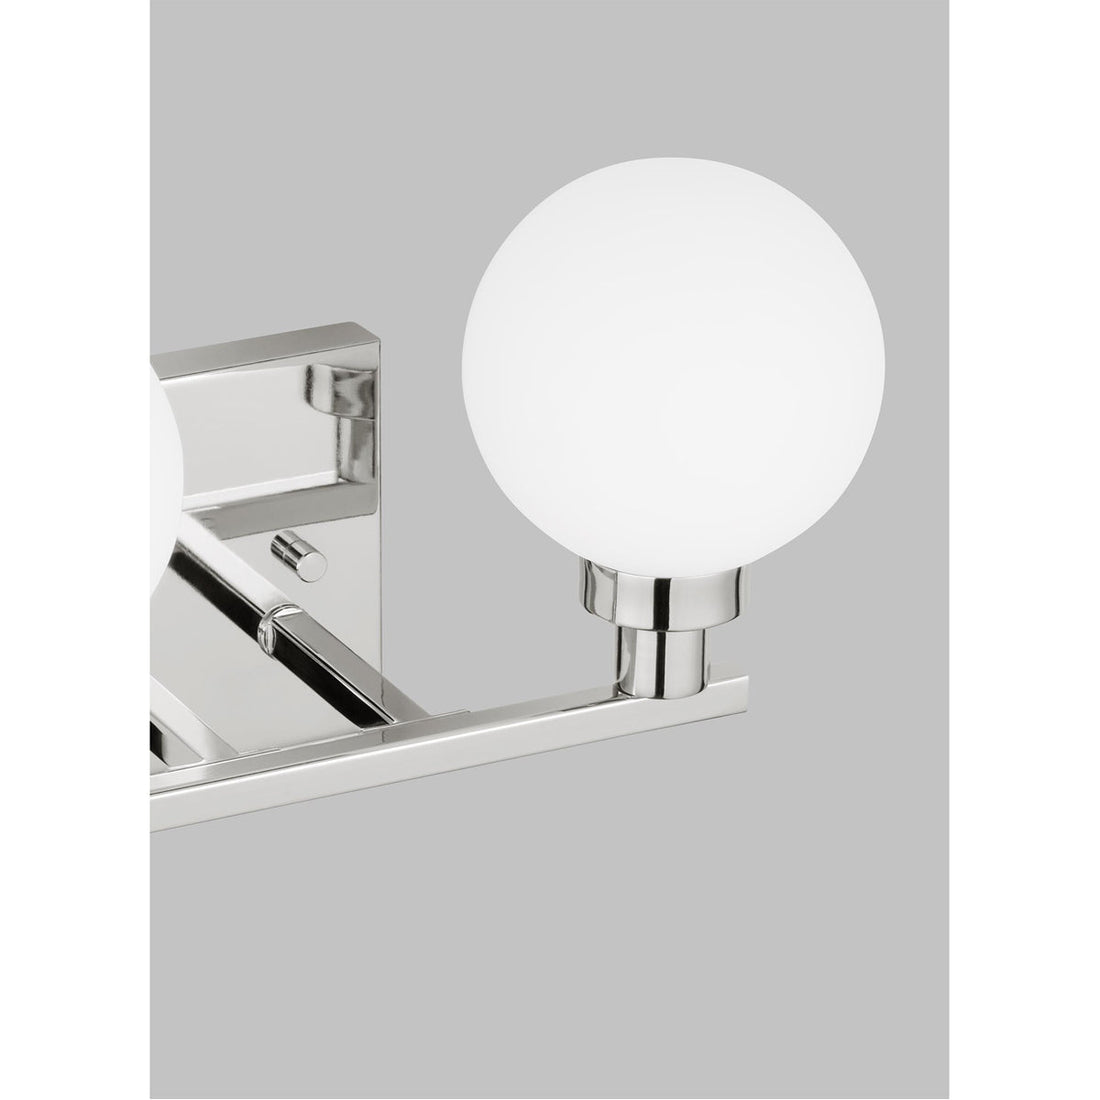 Sea Gull Lighting Clybourn 2-Light Wall/Bath Sconce without Bulb